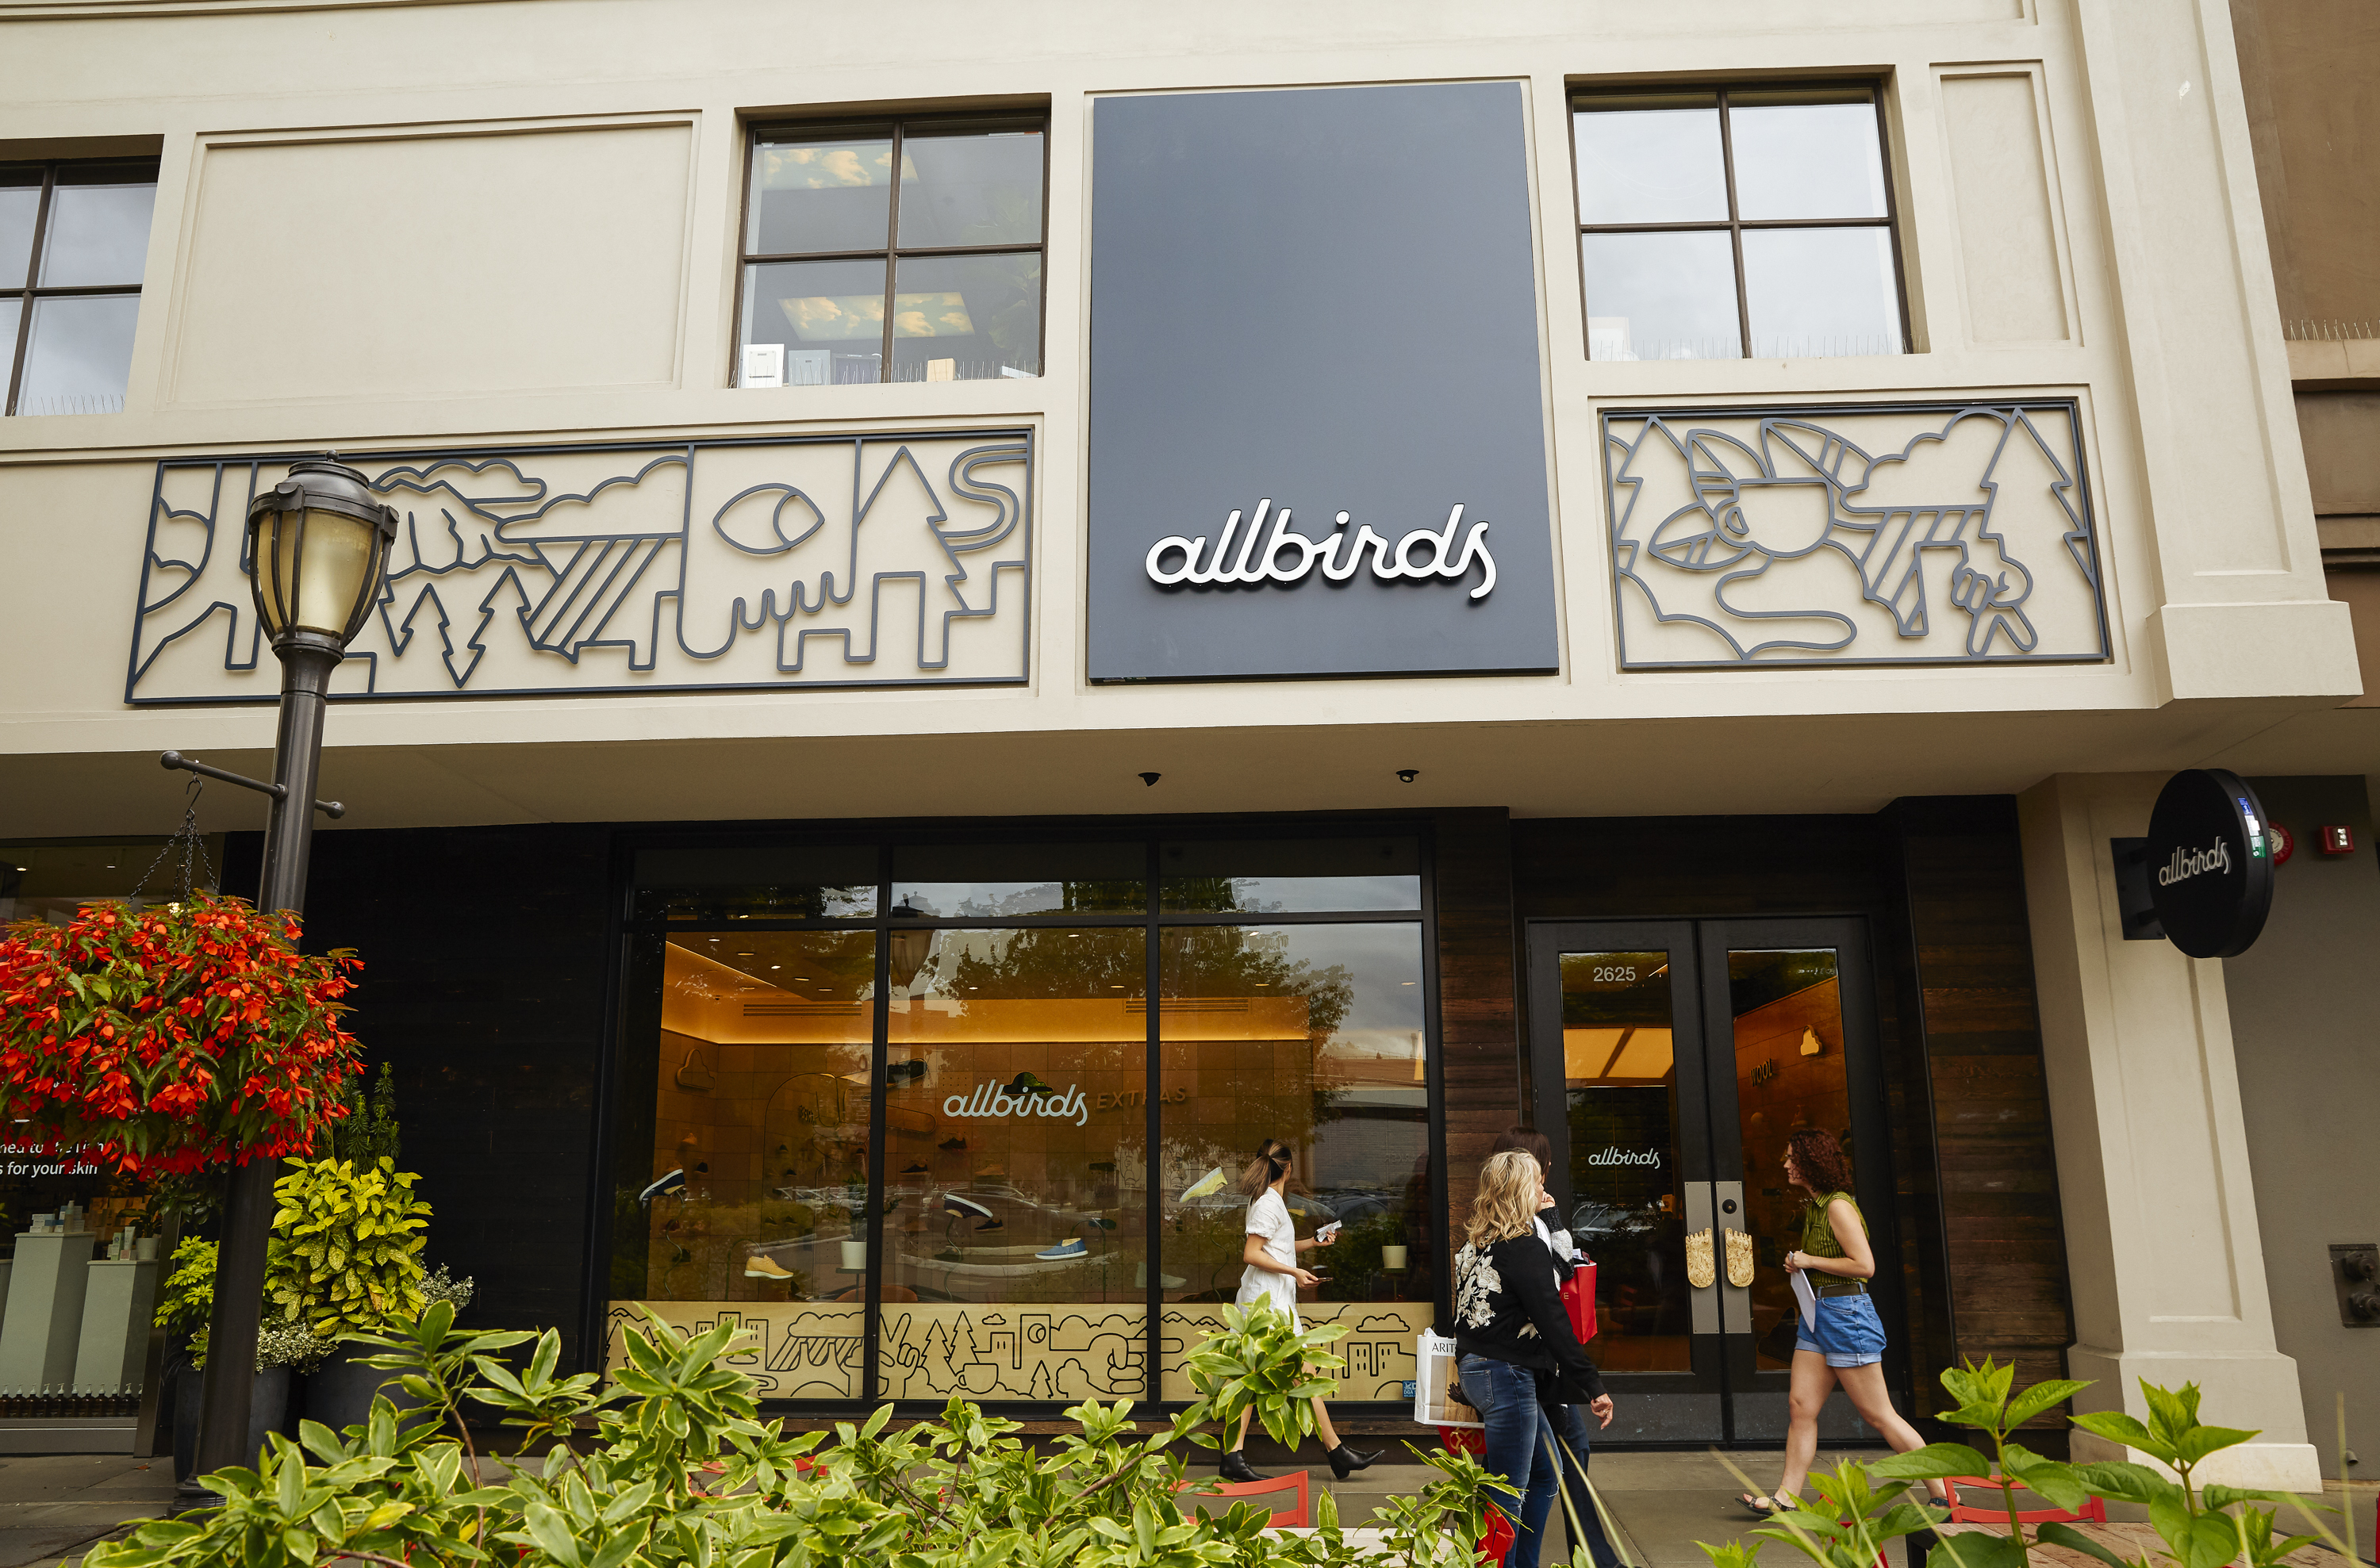 Allbirds opens in UVillage on May 24 